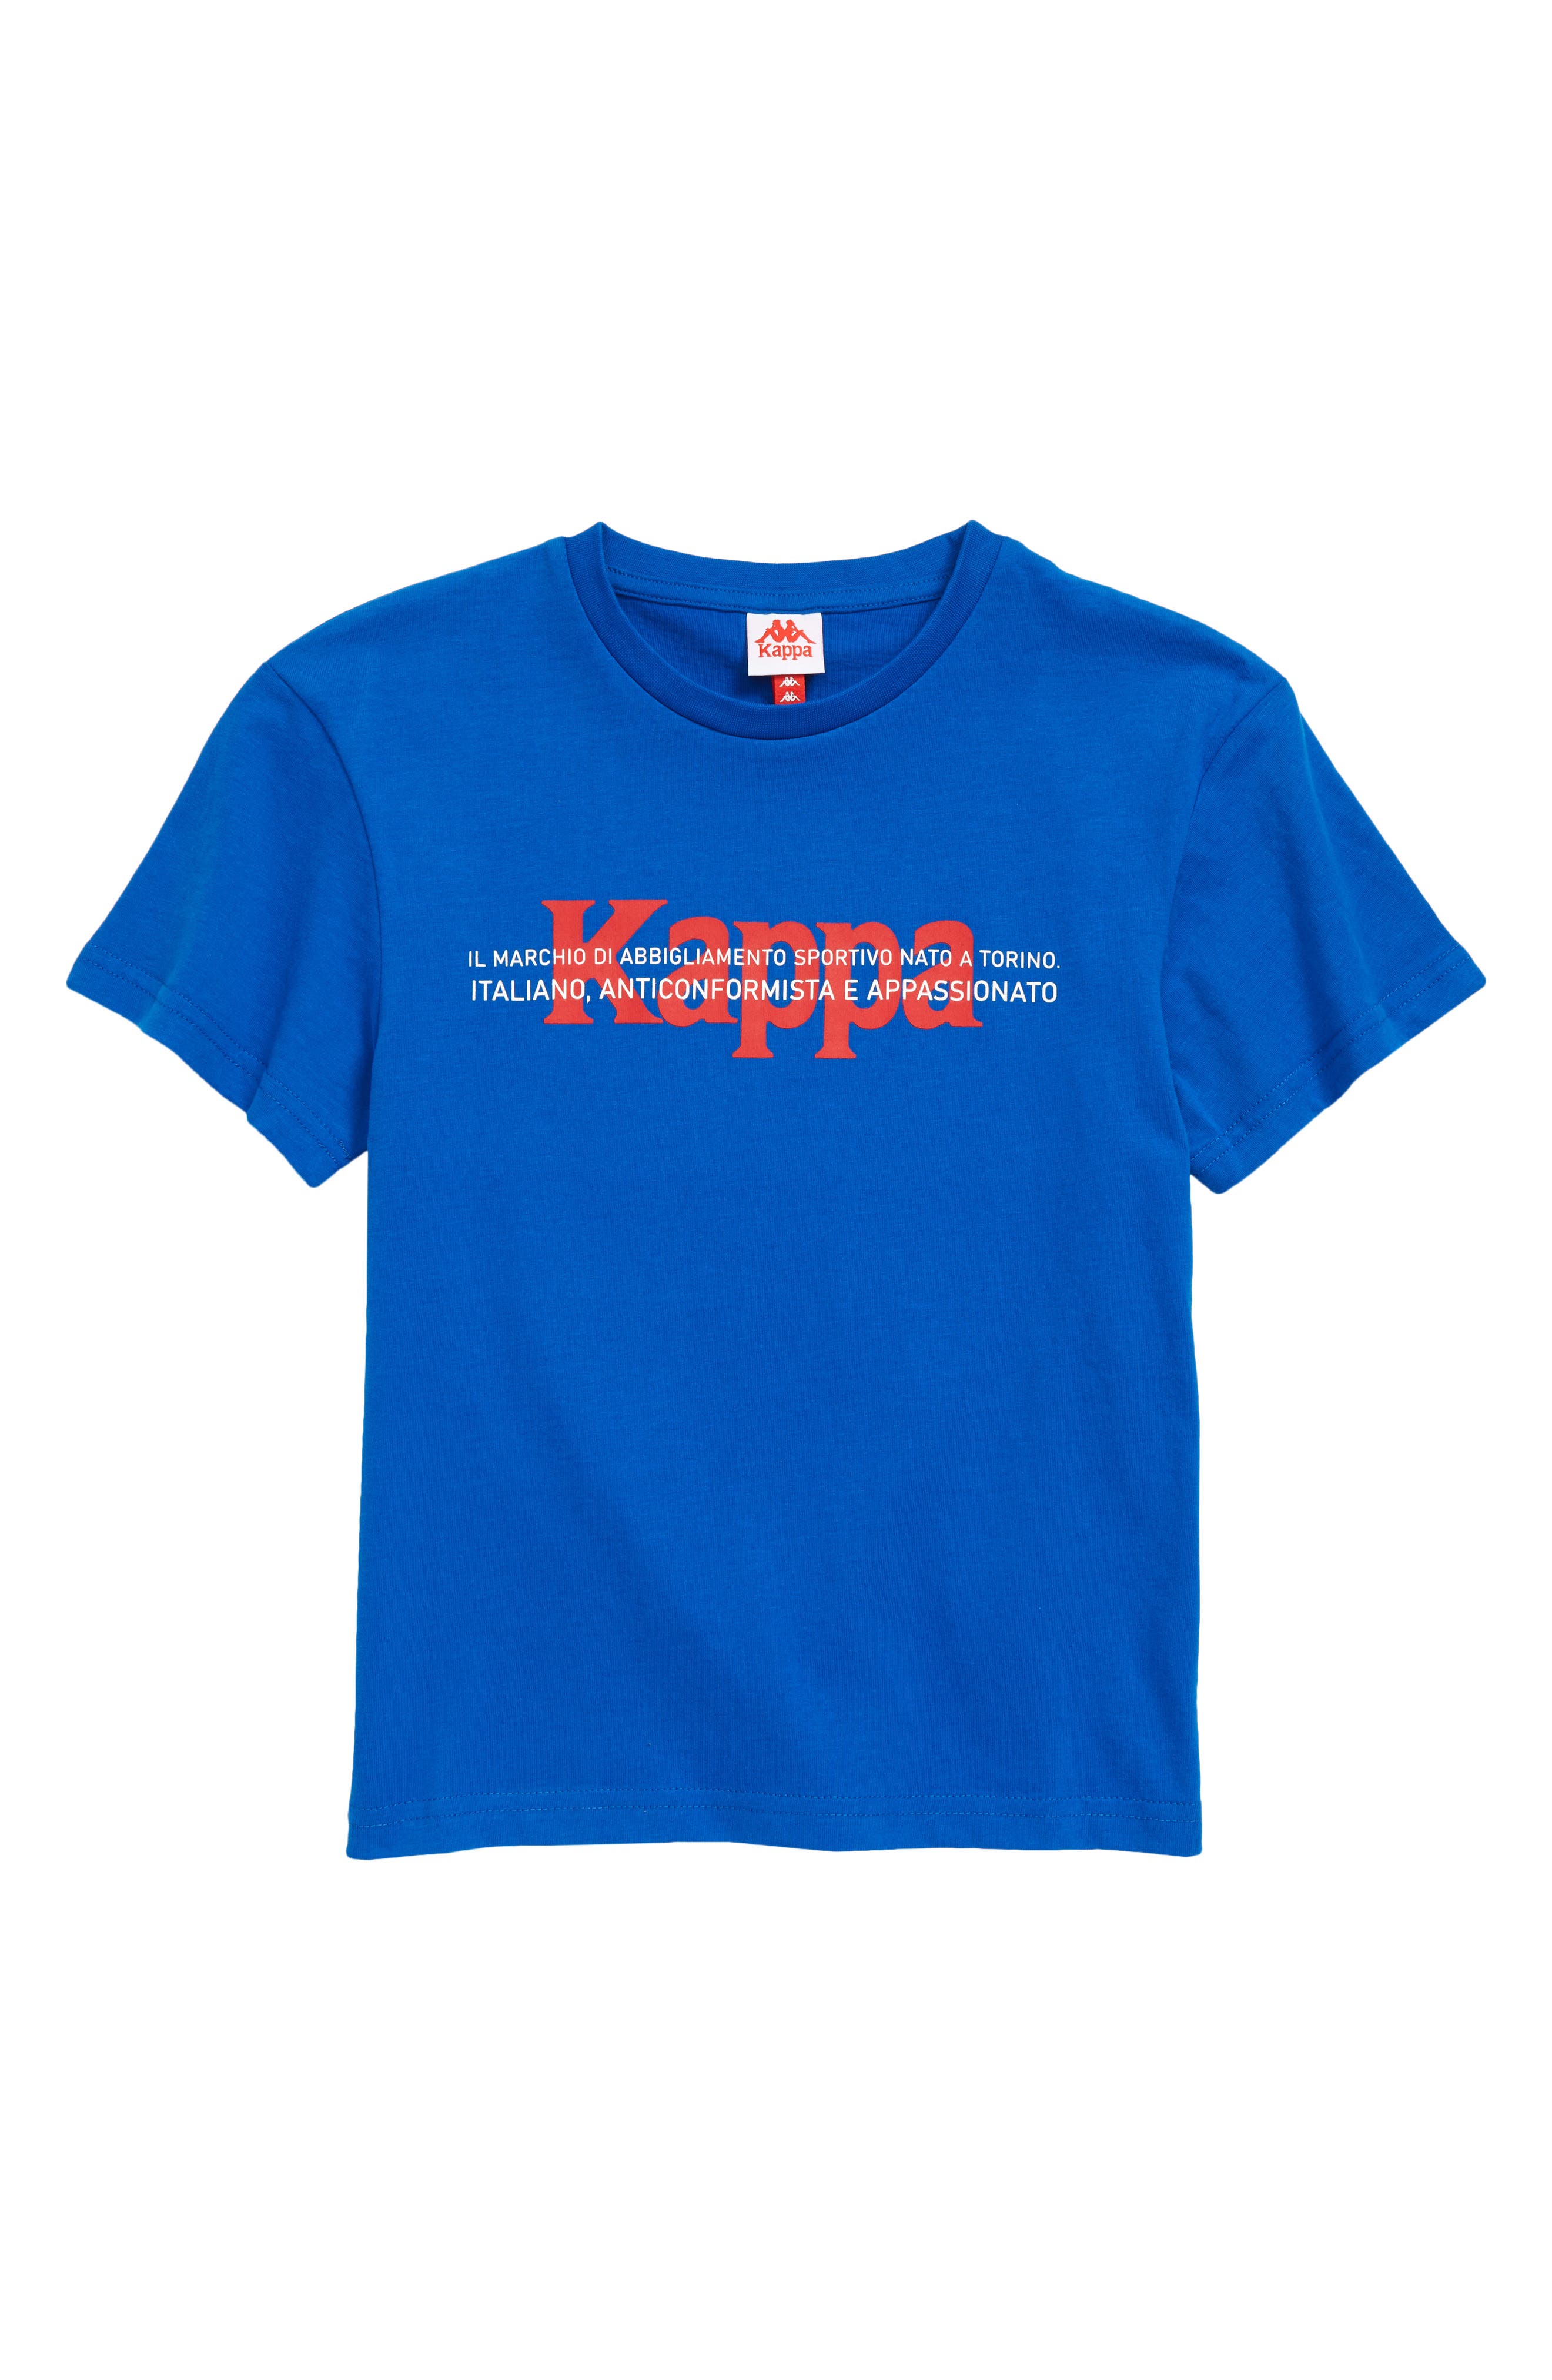 Kappa Authentic Logo Crewneck Tee in Blue Royal-Red Md at Nordstrom, Size 6Y Us